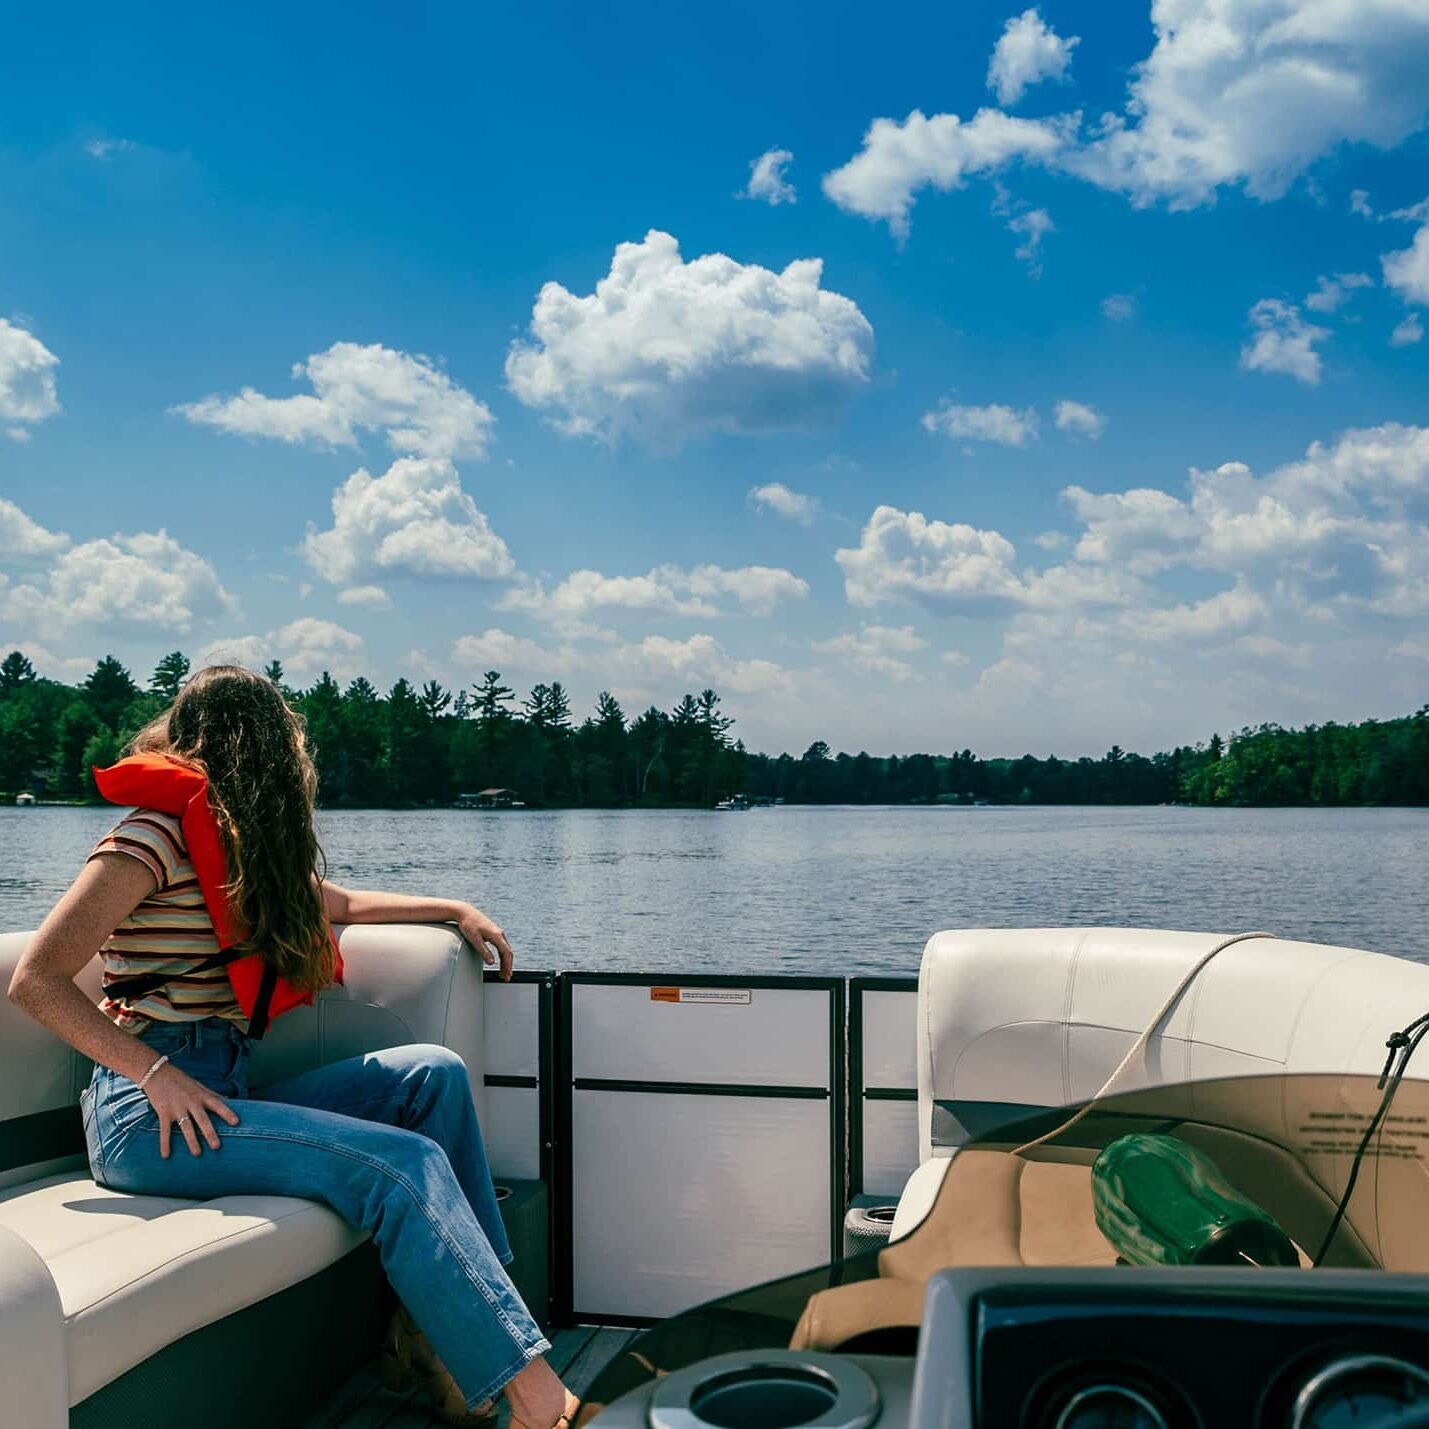 A person wearing a life jacket sits on a boat looking at the lake and surrounding trees under a partly cloudy sky.